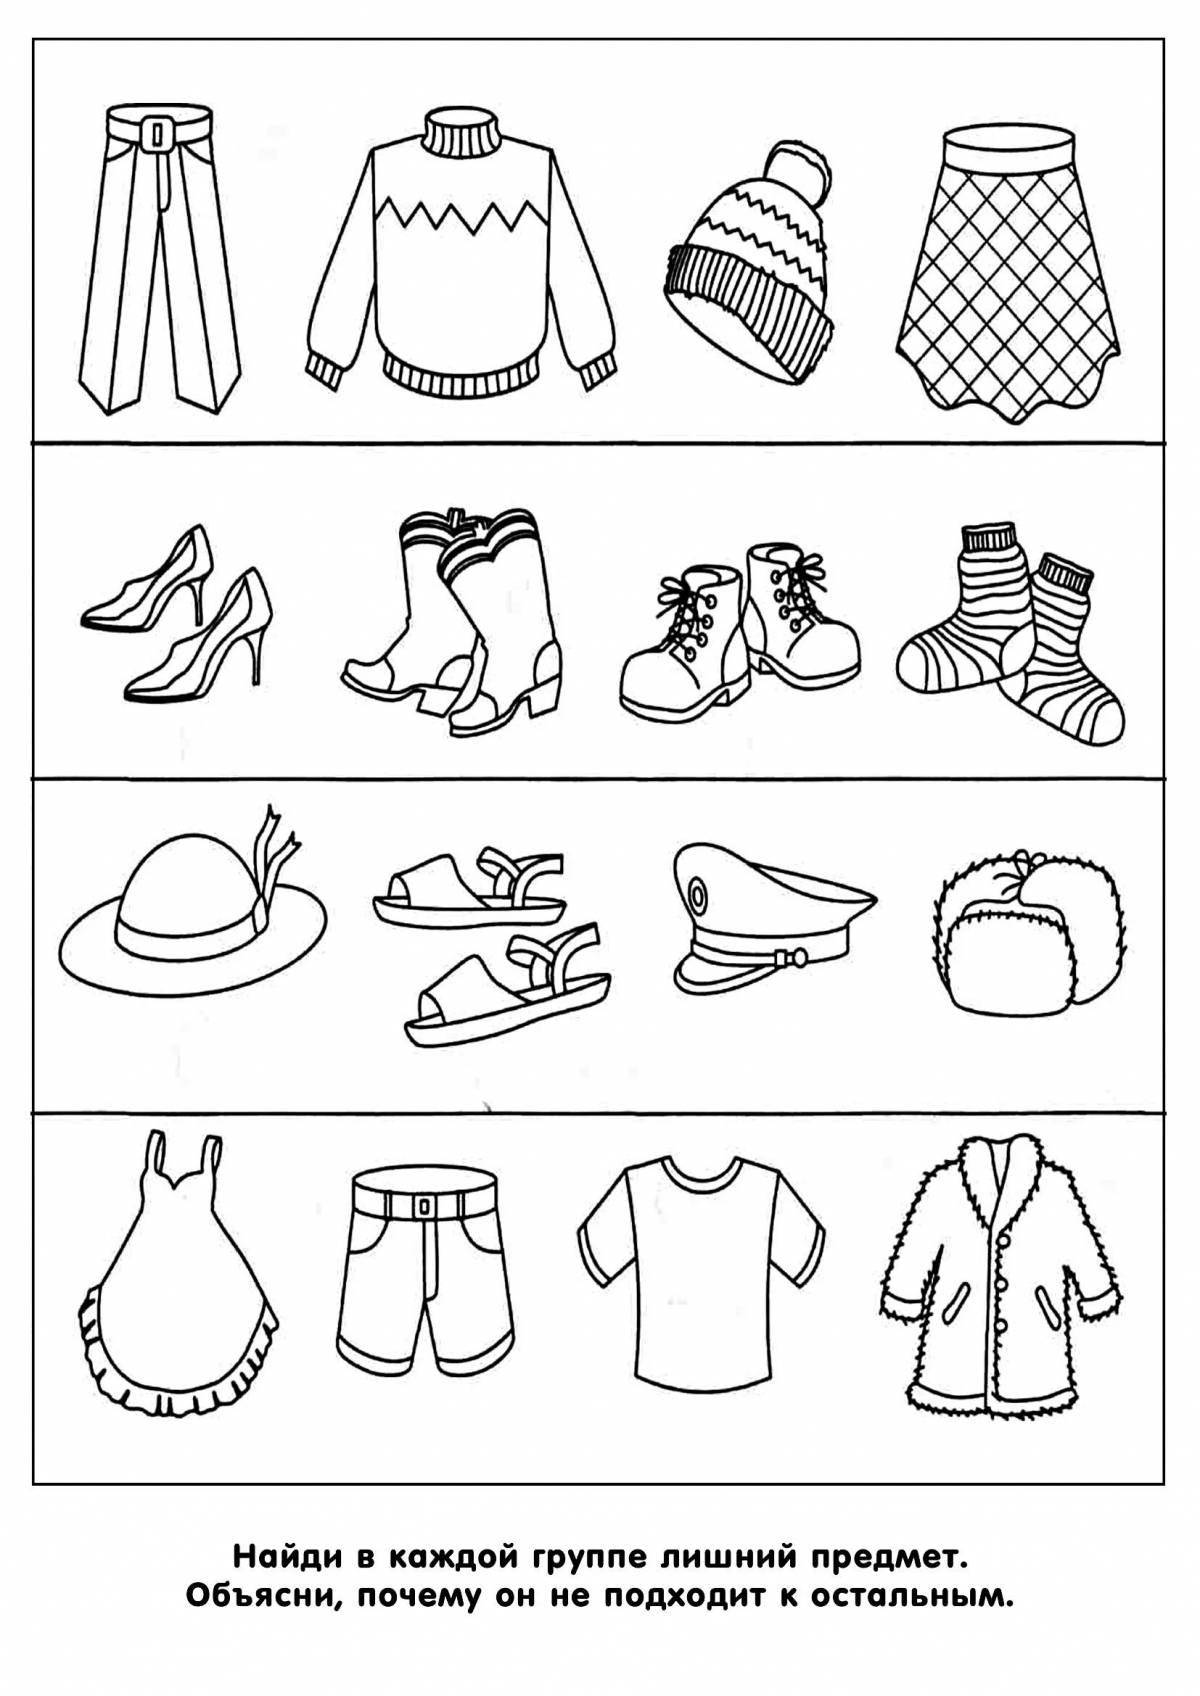 Colored clothes and shoes coloring book